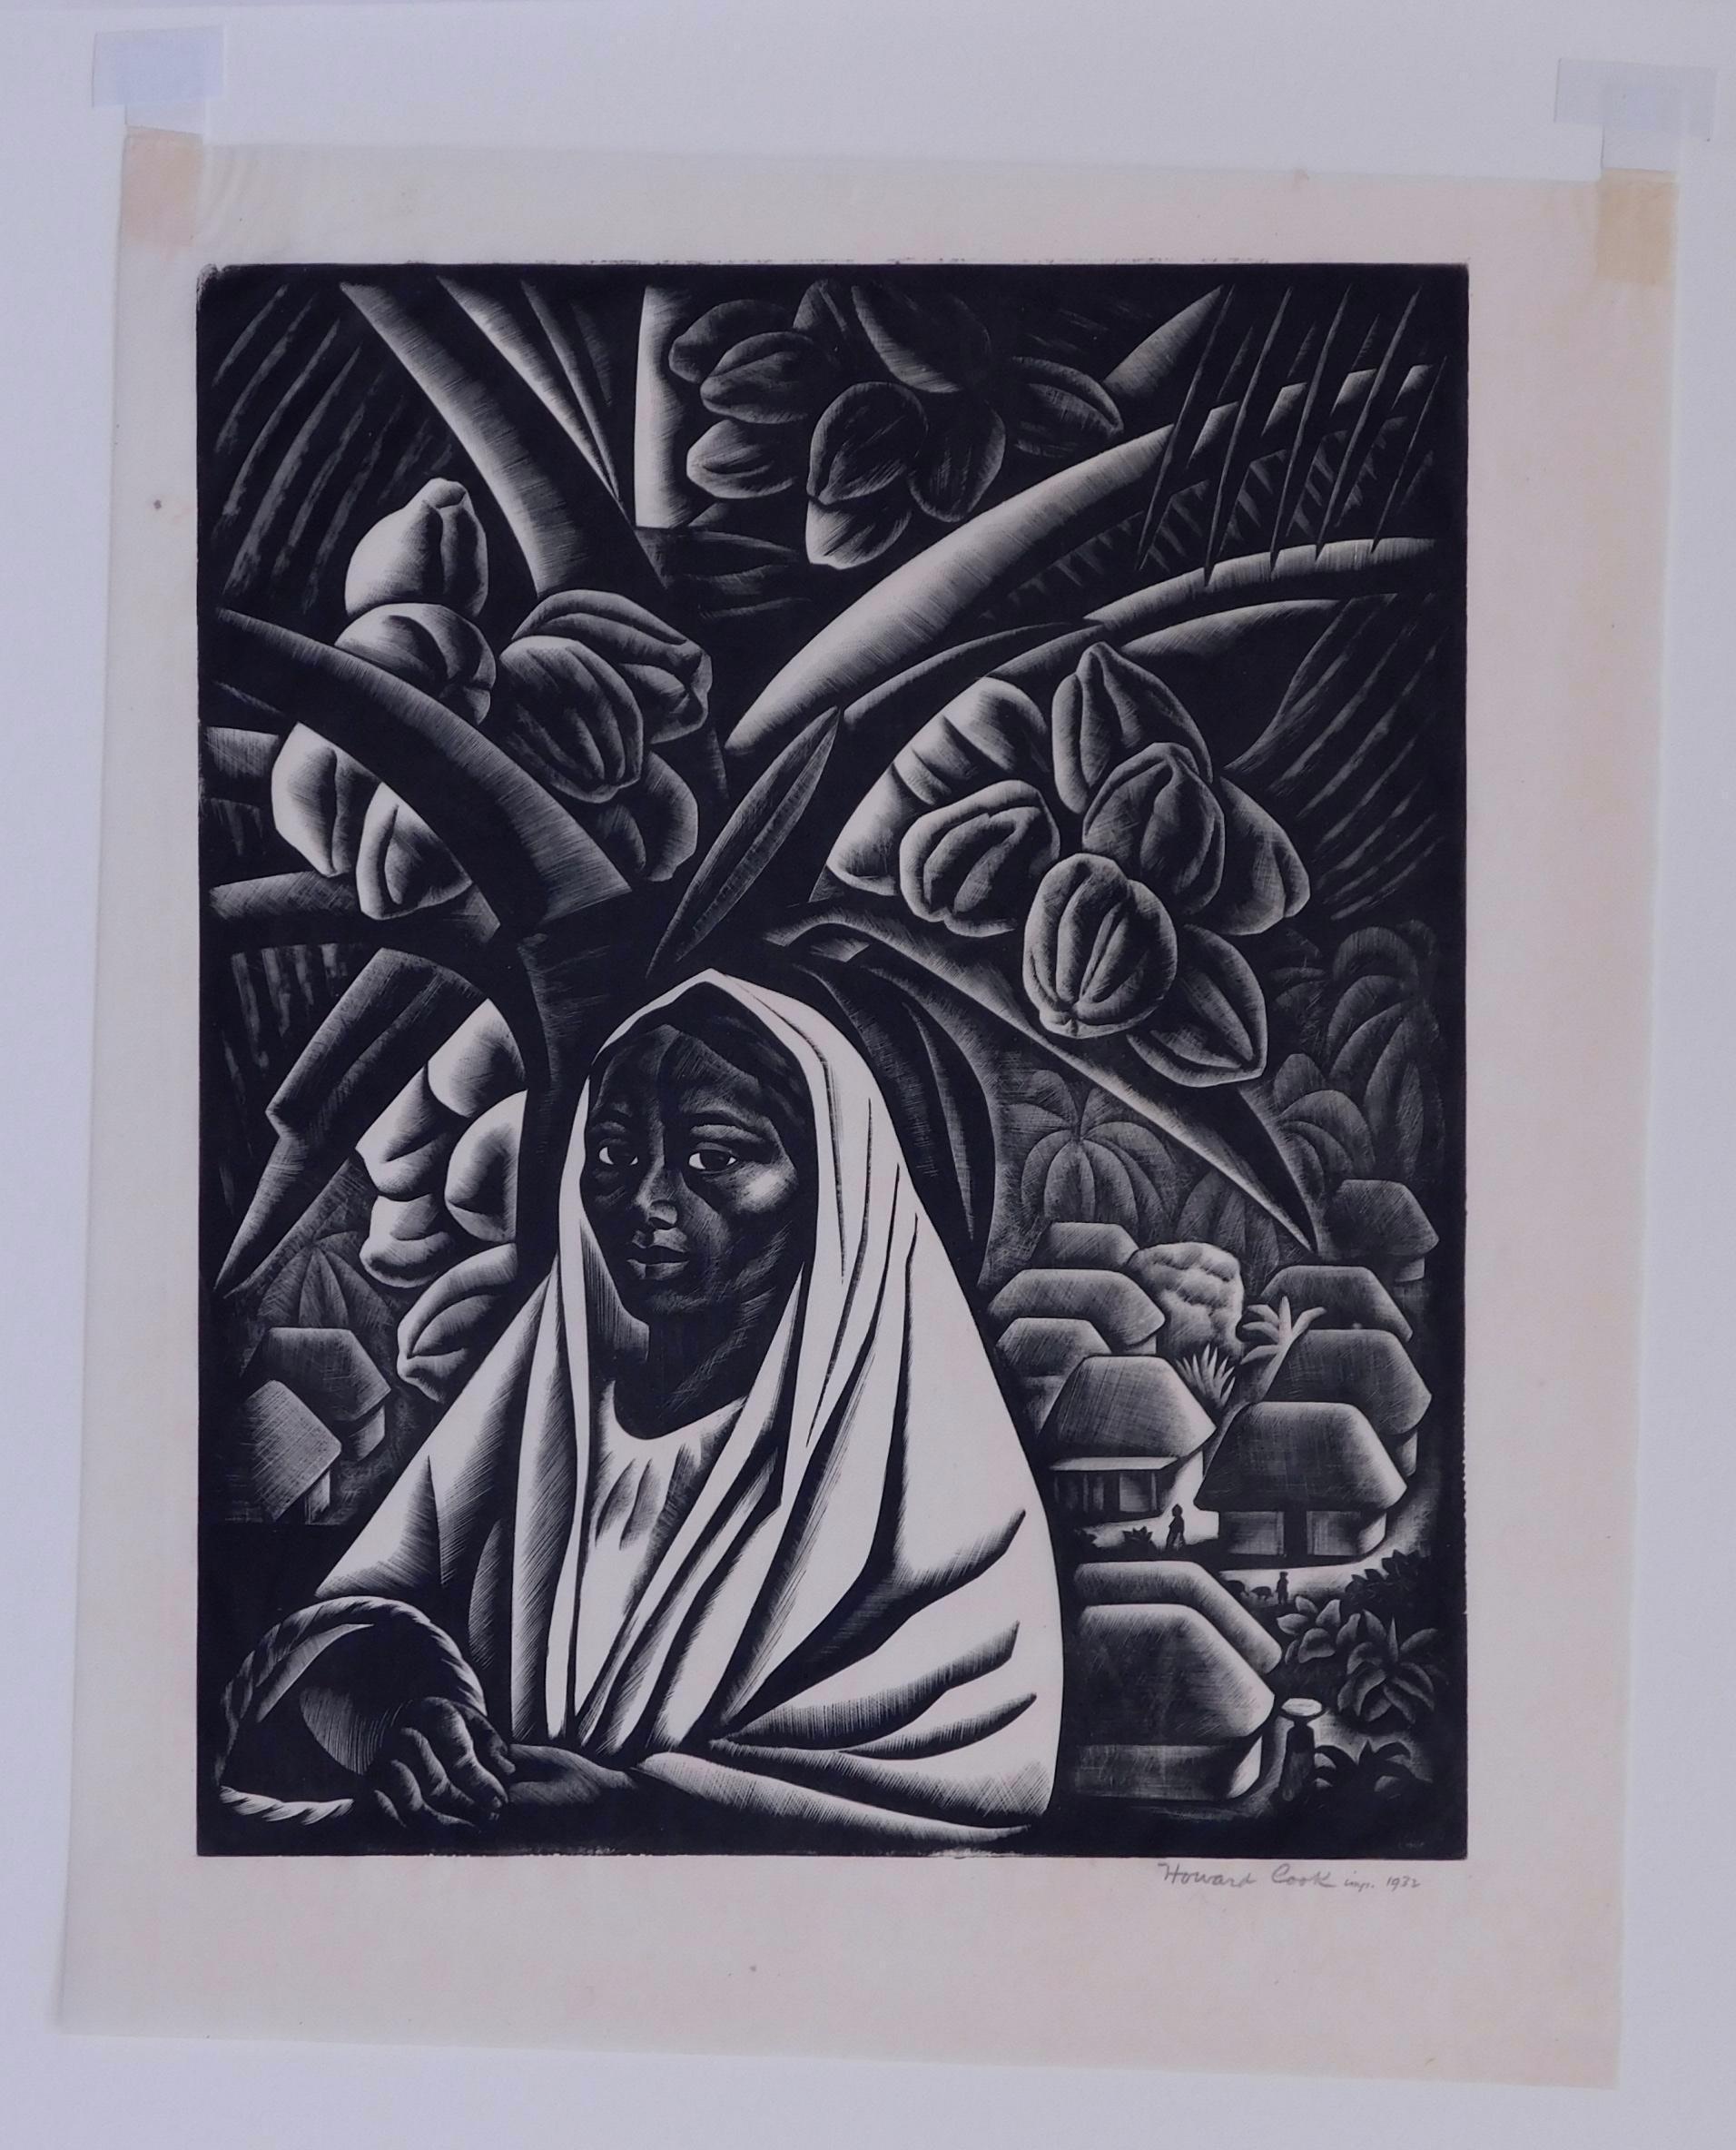 Wonderful wood-engraving by Taos artist Howard Cook (1901-1980).
Titled: “Acapulco Girl (alternate title: Coconut Palm).” Edition: 30. 
Image size: 10 1/16